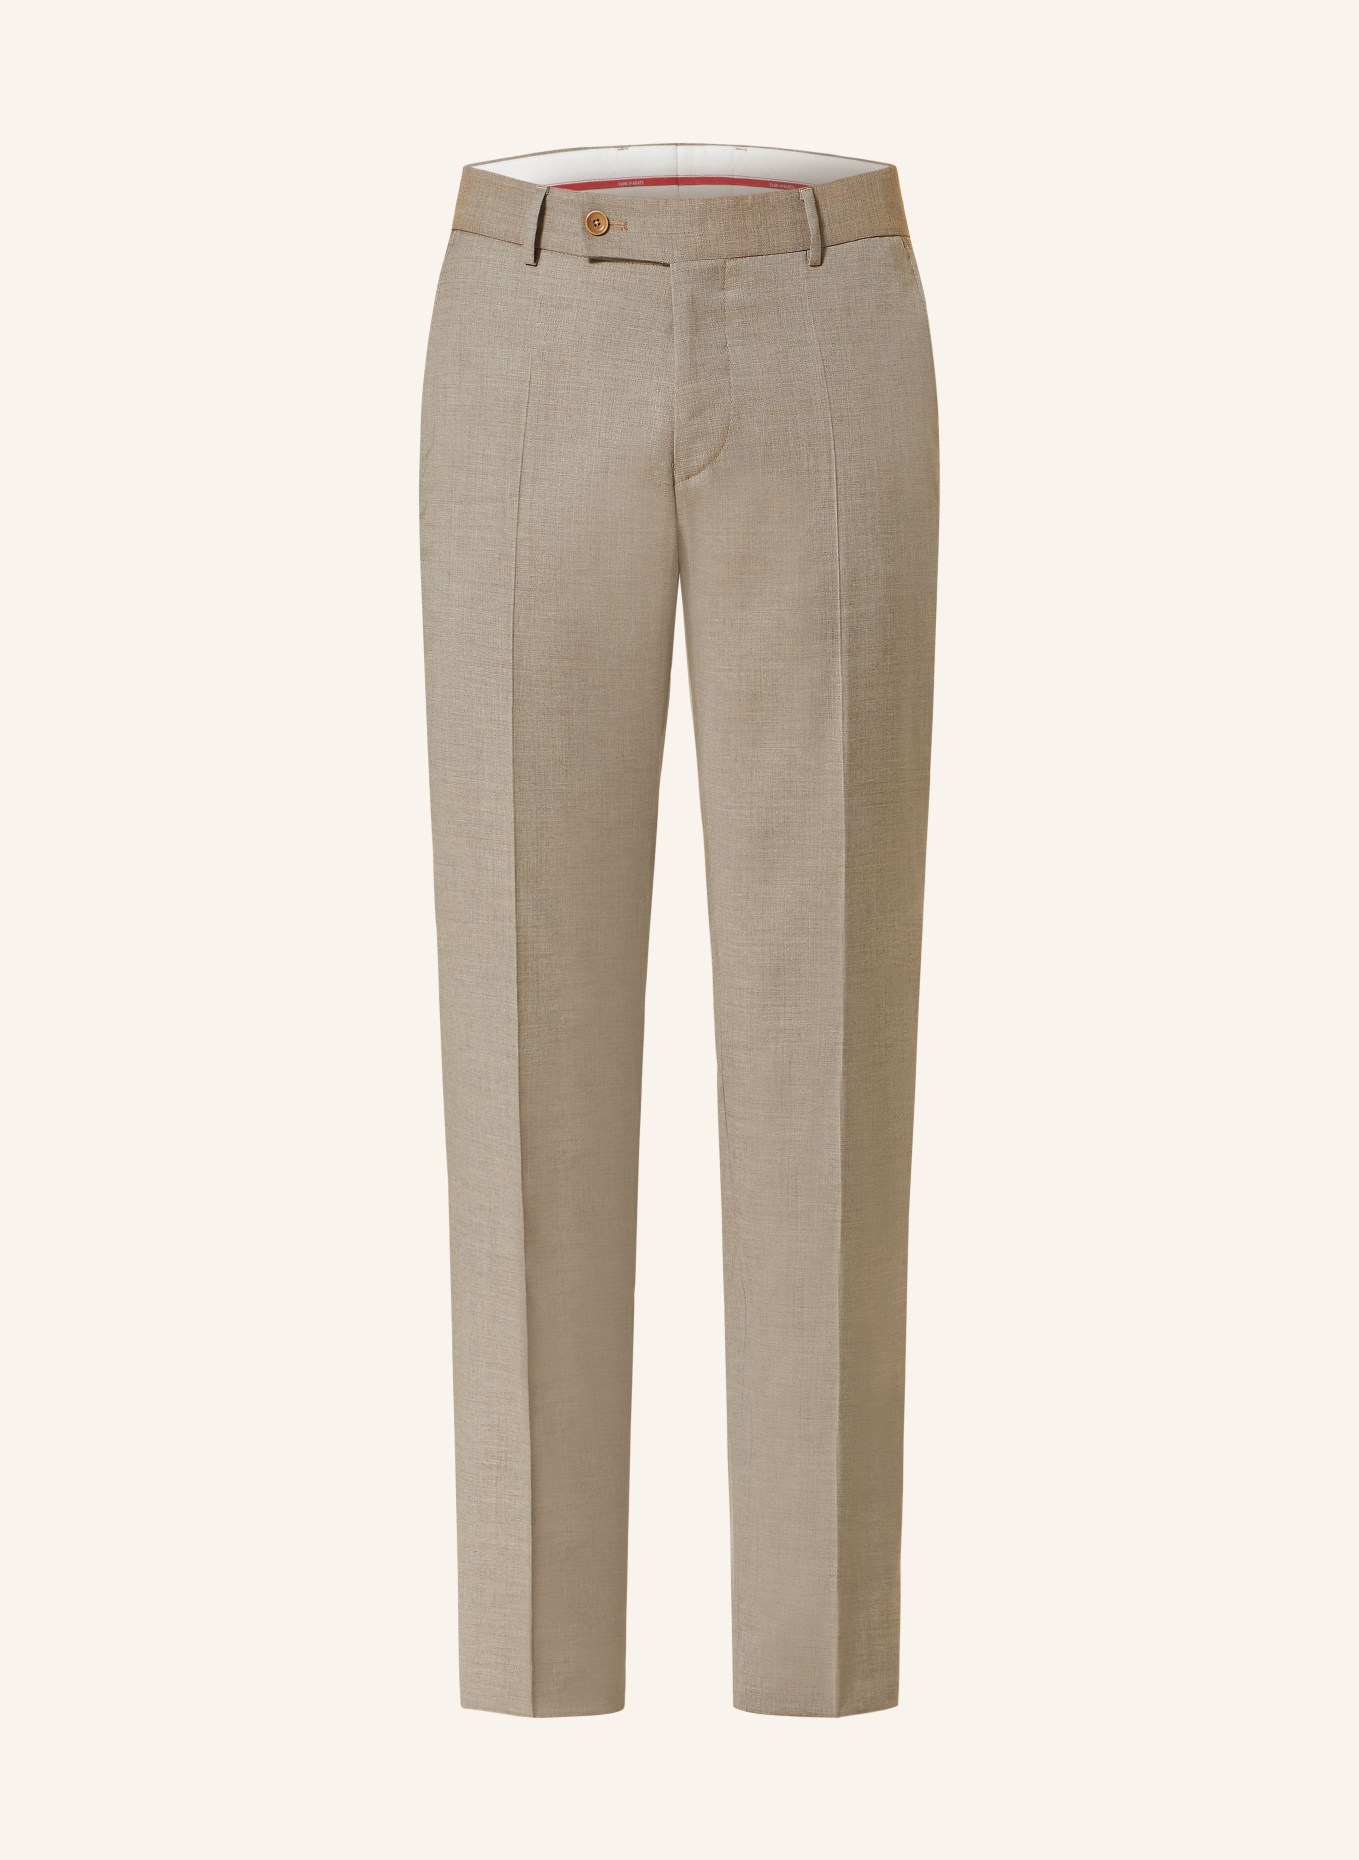 CG - CLUB of GENTS Suit trousers CG PACO slim fit, Color: 71 BRAUN HELL (Image 1)